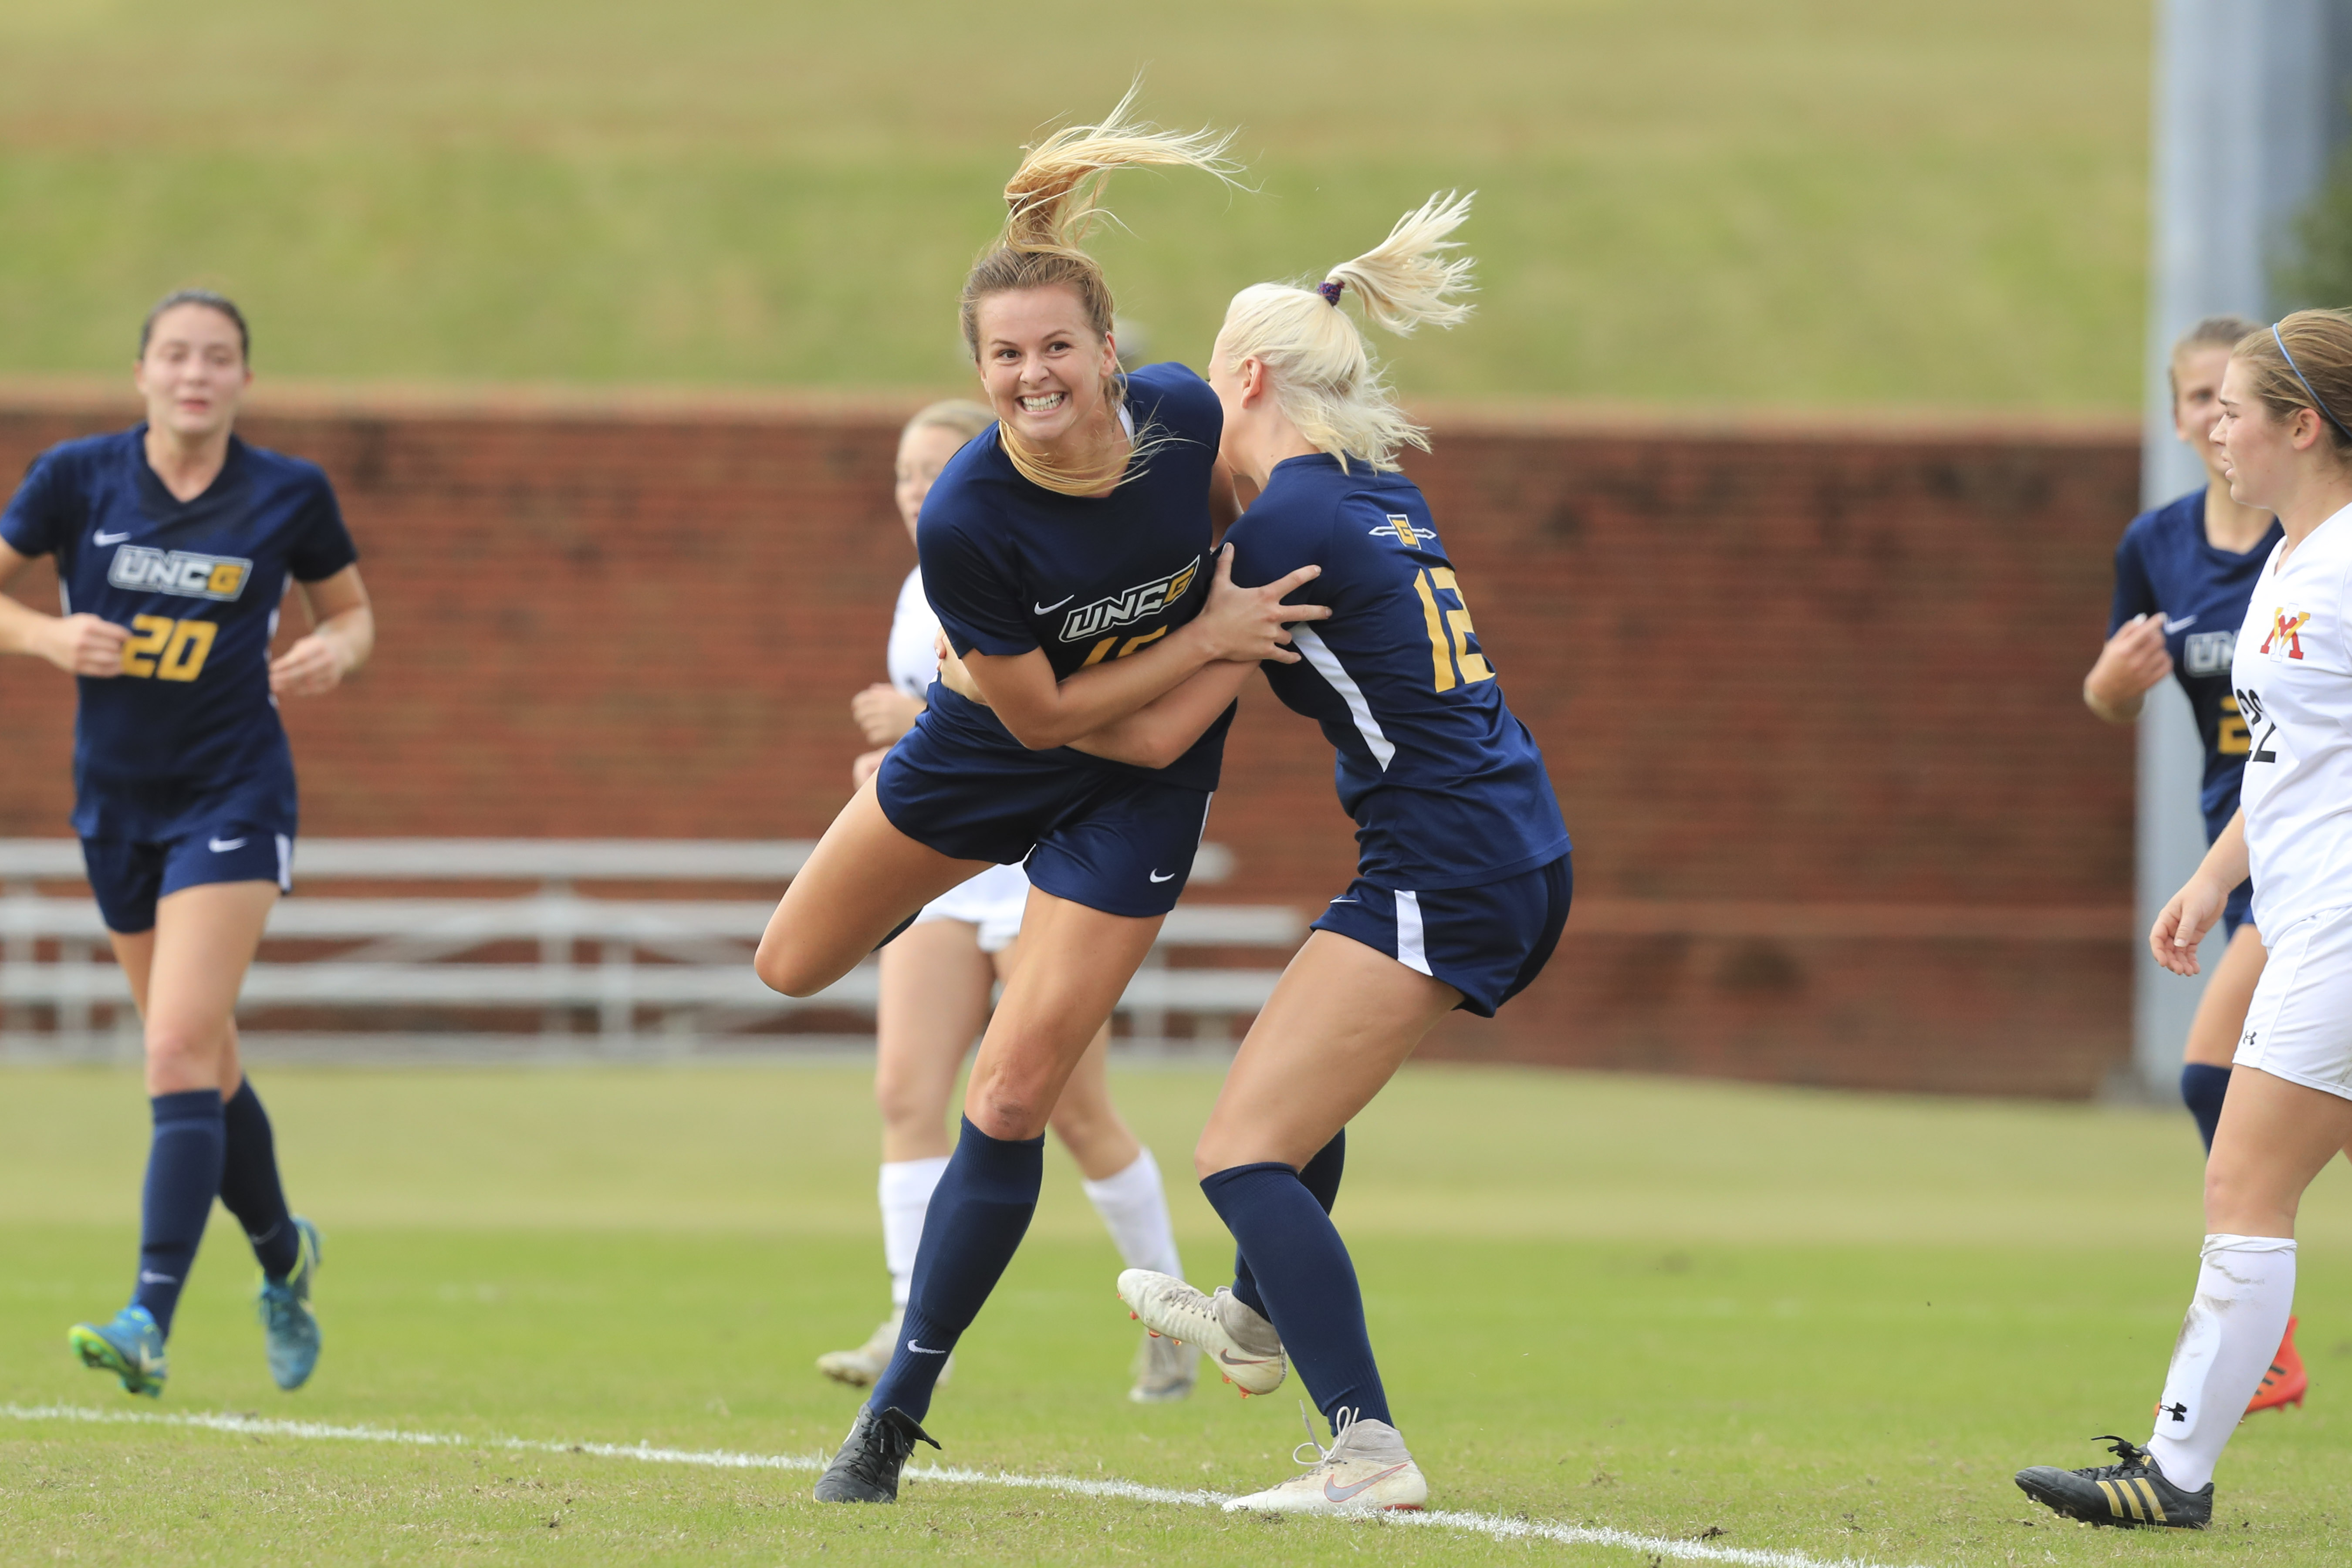 GIRLS COLLEGE ID CLINIC AT UNC GREENSBORO May 7, 2023. GOALKEEPER MAX HAS BEEN REACHED!! event image